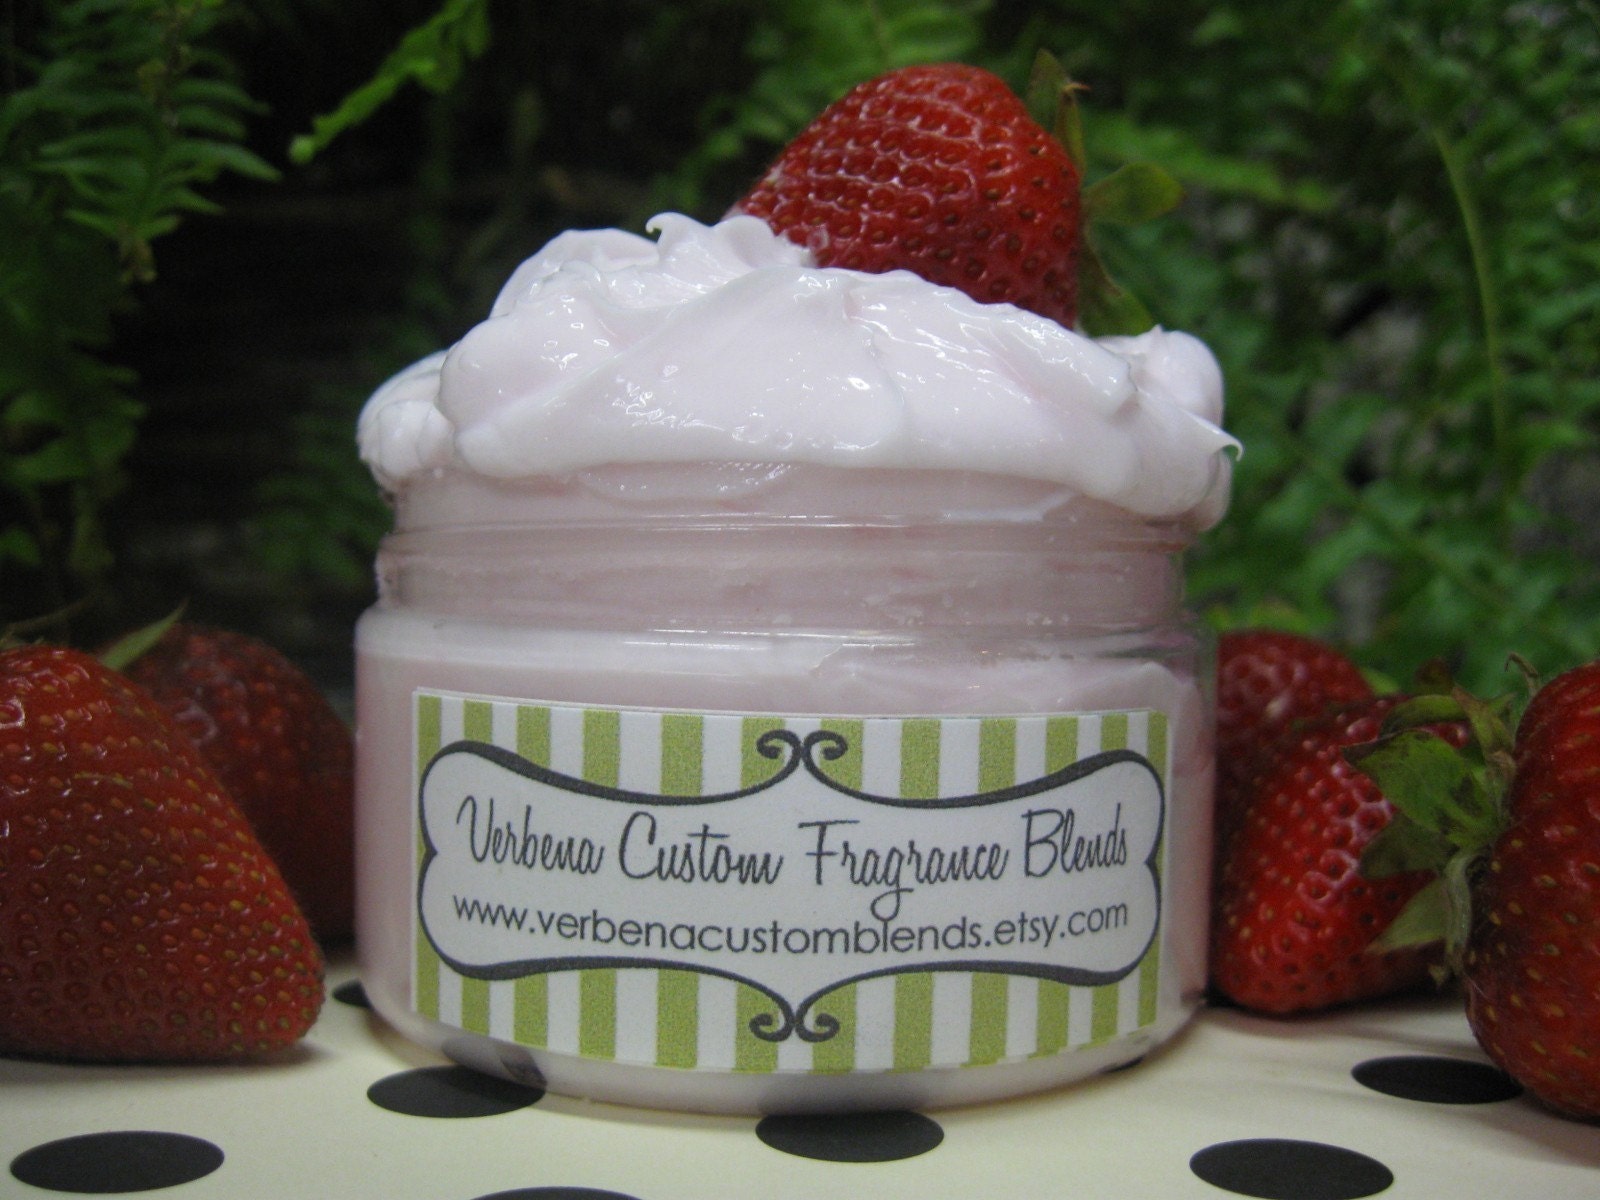 BUY 2 GET 1 FREE FOR EVERYONE- SEE SHOP- STRAWBERRY BANANA COCONUT MARSHMALLOW FLUFF PARFAIT scented  ALL NATURAL WHIPPED YOGURT BODY CREAM - Loaded With Lush Ingredients- Chamomile, Aloe Vera, Jojoba OIl and Avocado Oil 5.6 oz- MADE FROM SCRATCH